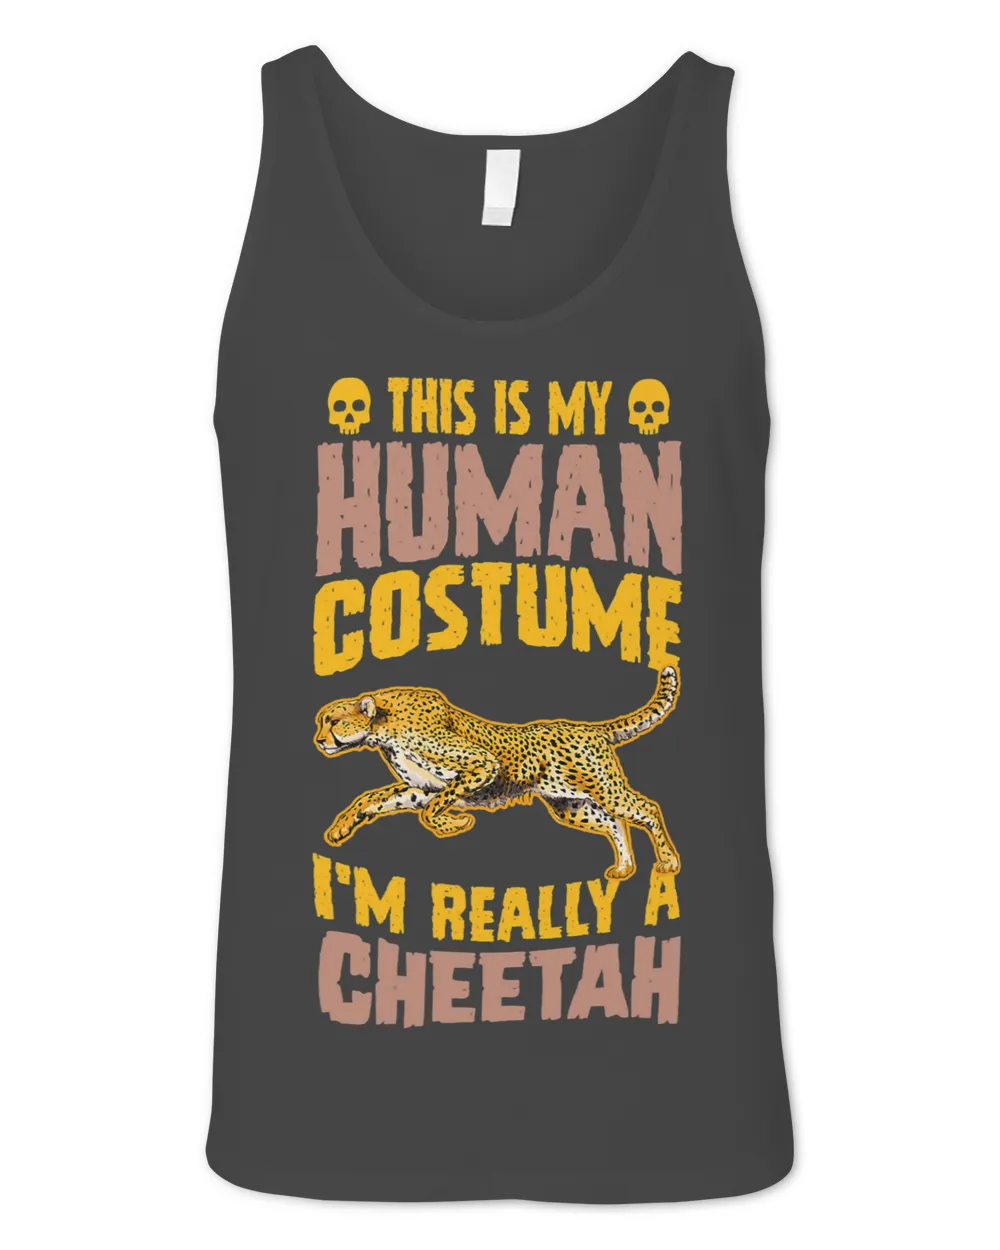 This Is My Human Costume Im Really A Cheetah Halloween